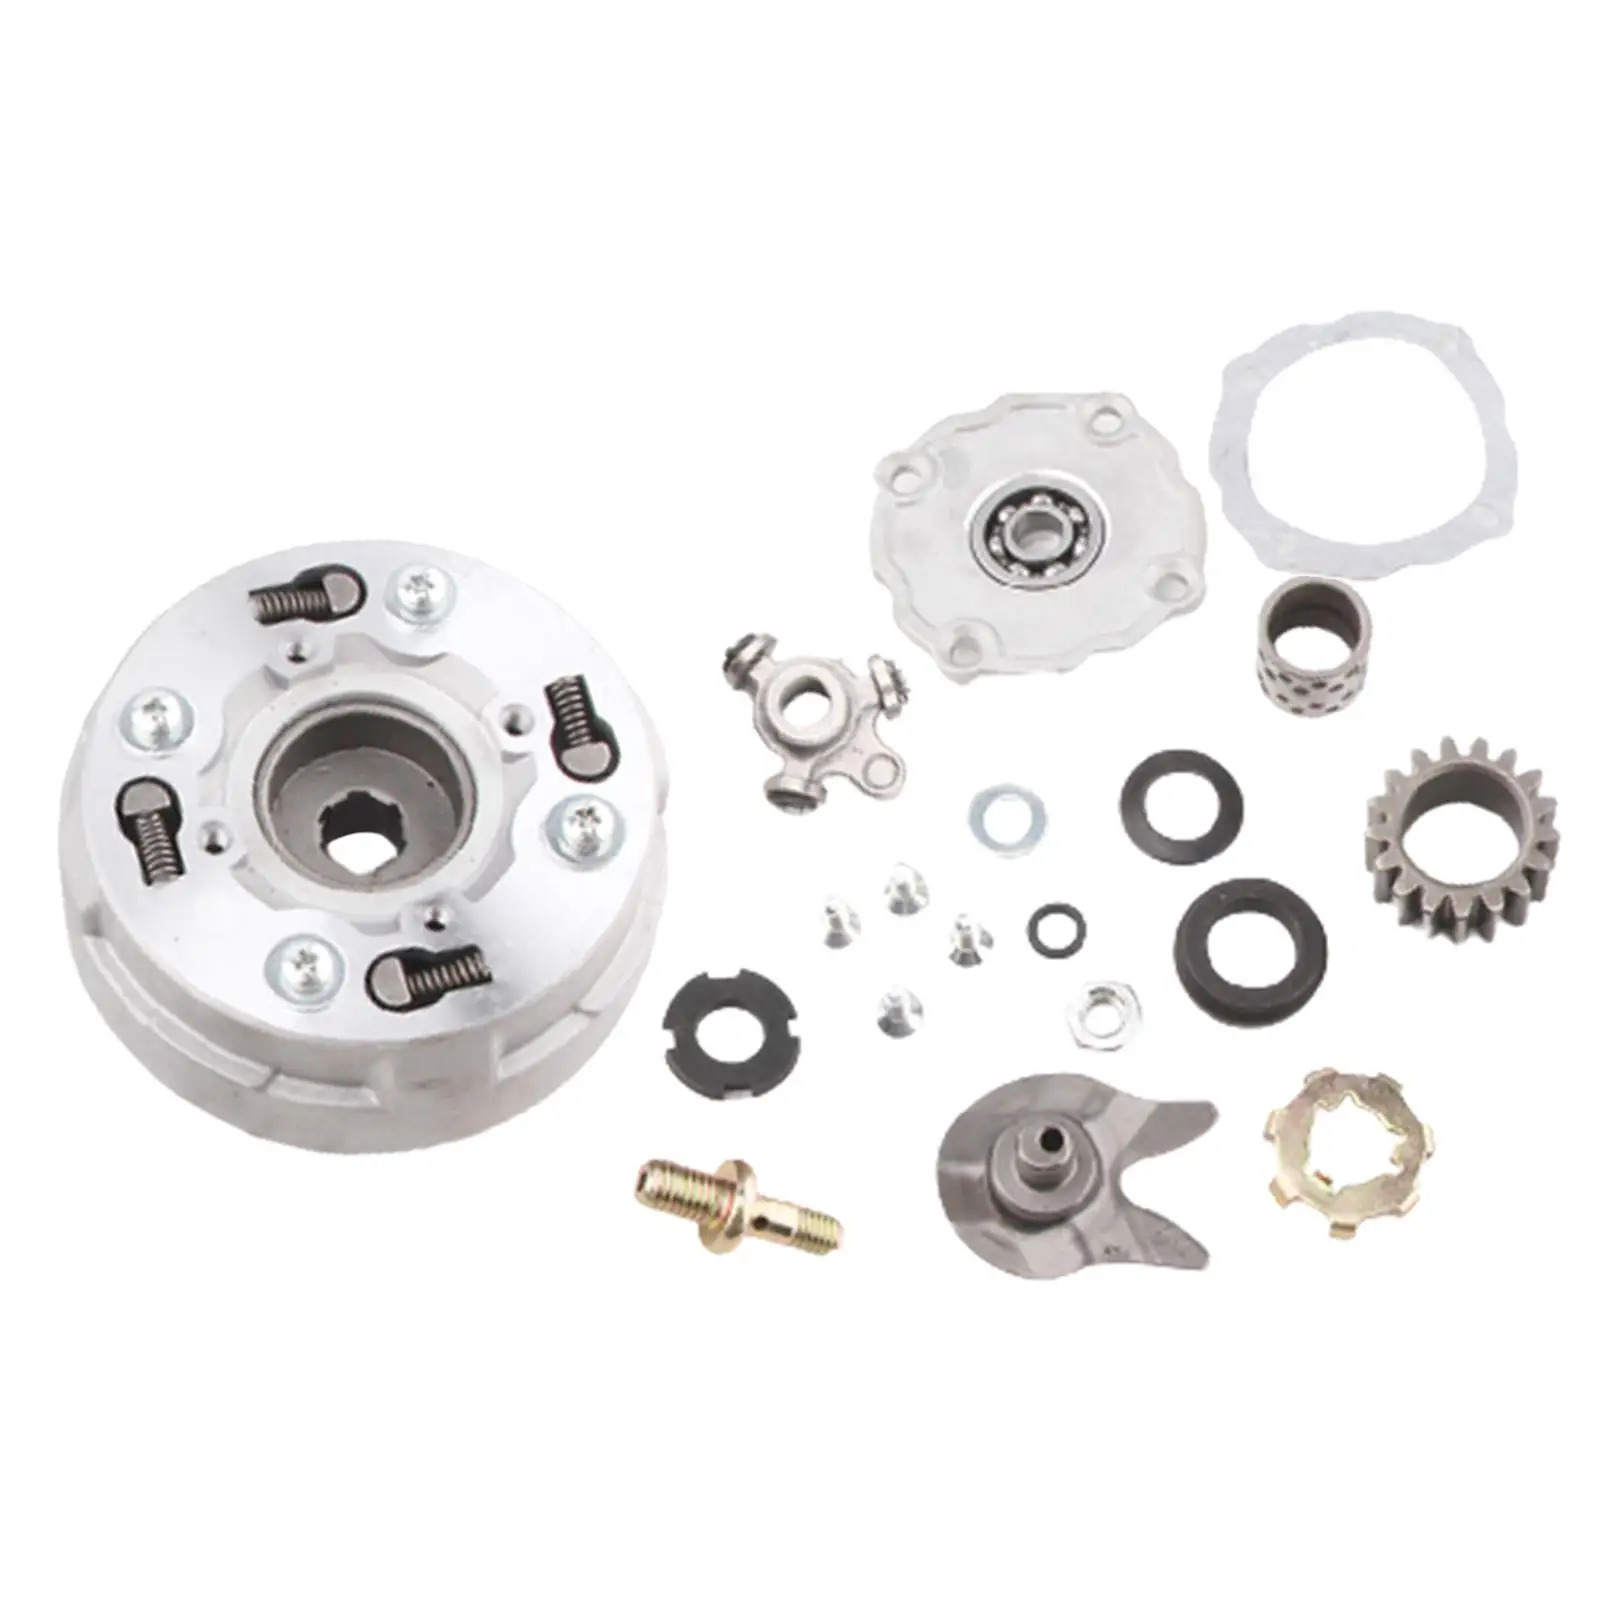 Semi Clutch  Assembly Kits for 90cc Chinese ATV, Dirt Bikes, Buggies